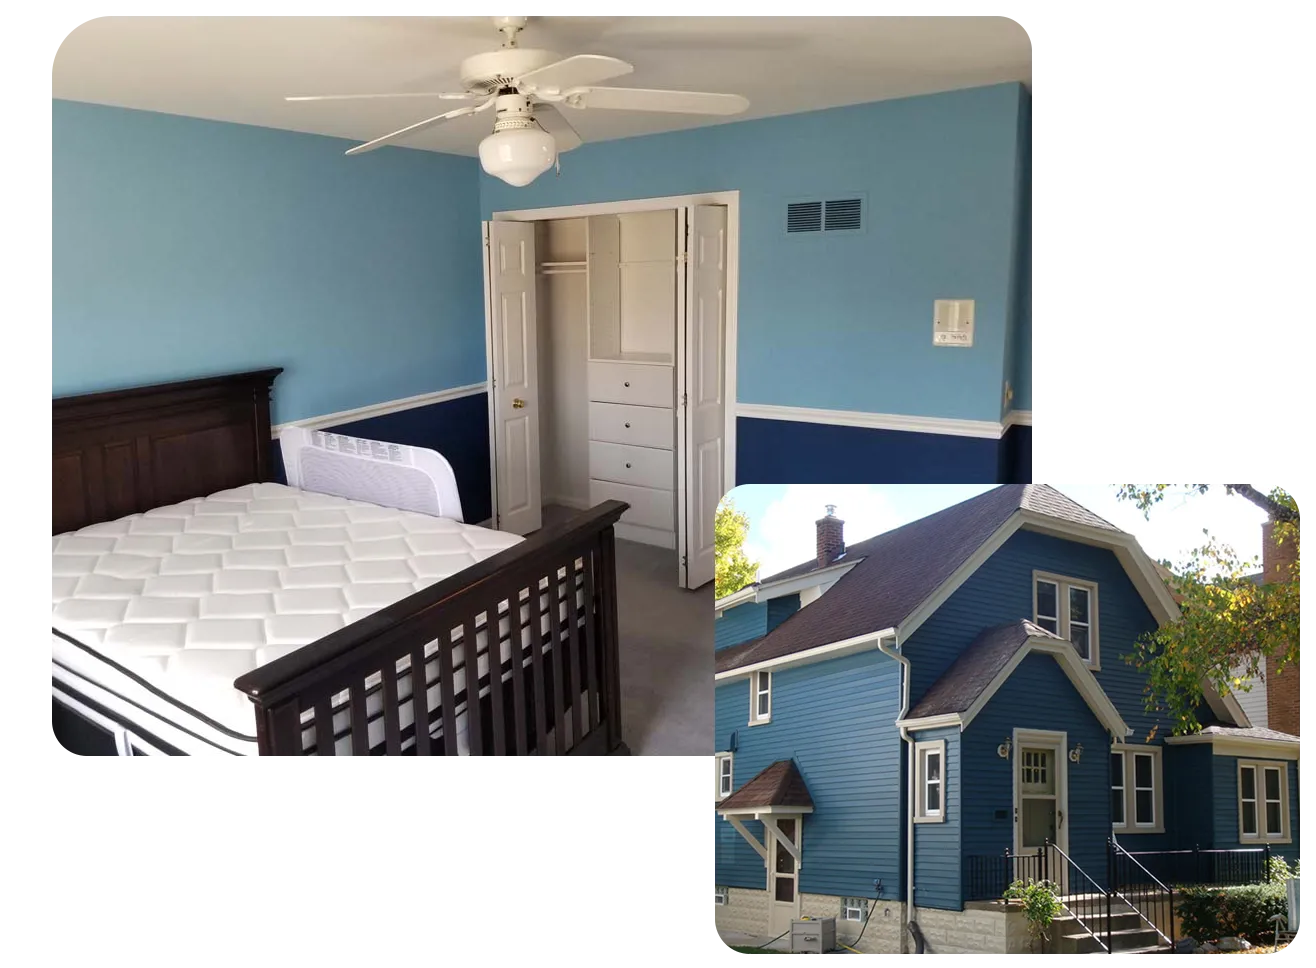 New home showing interior and exterior of the house painted blue